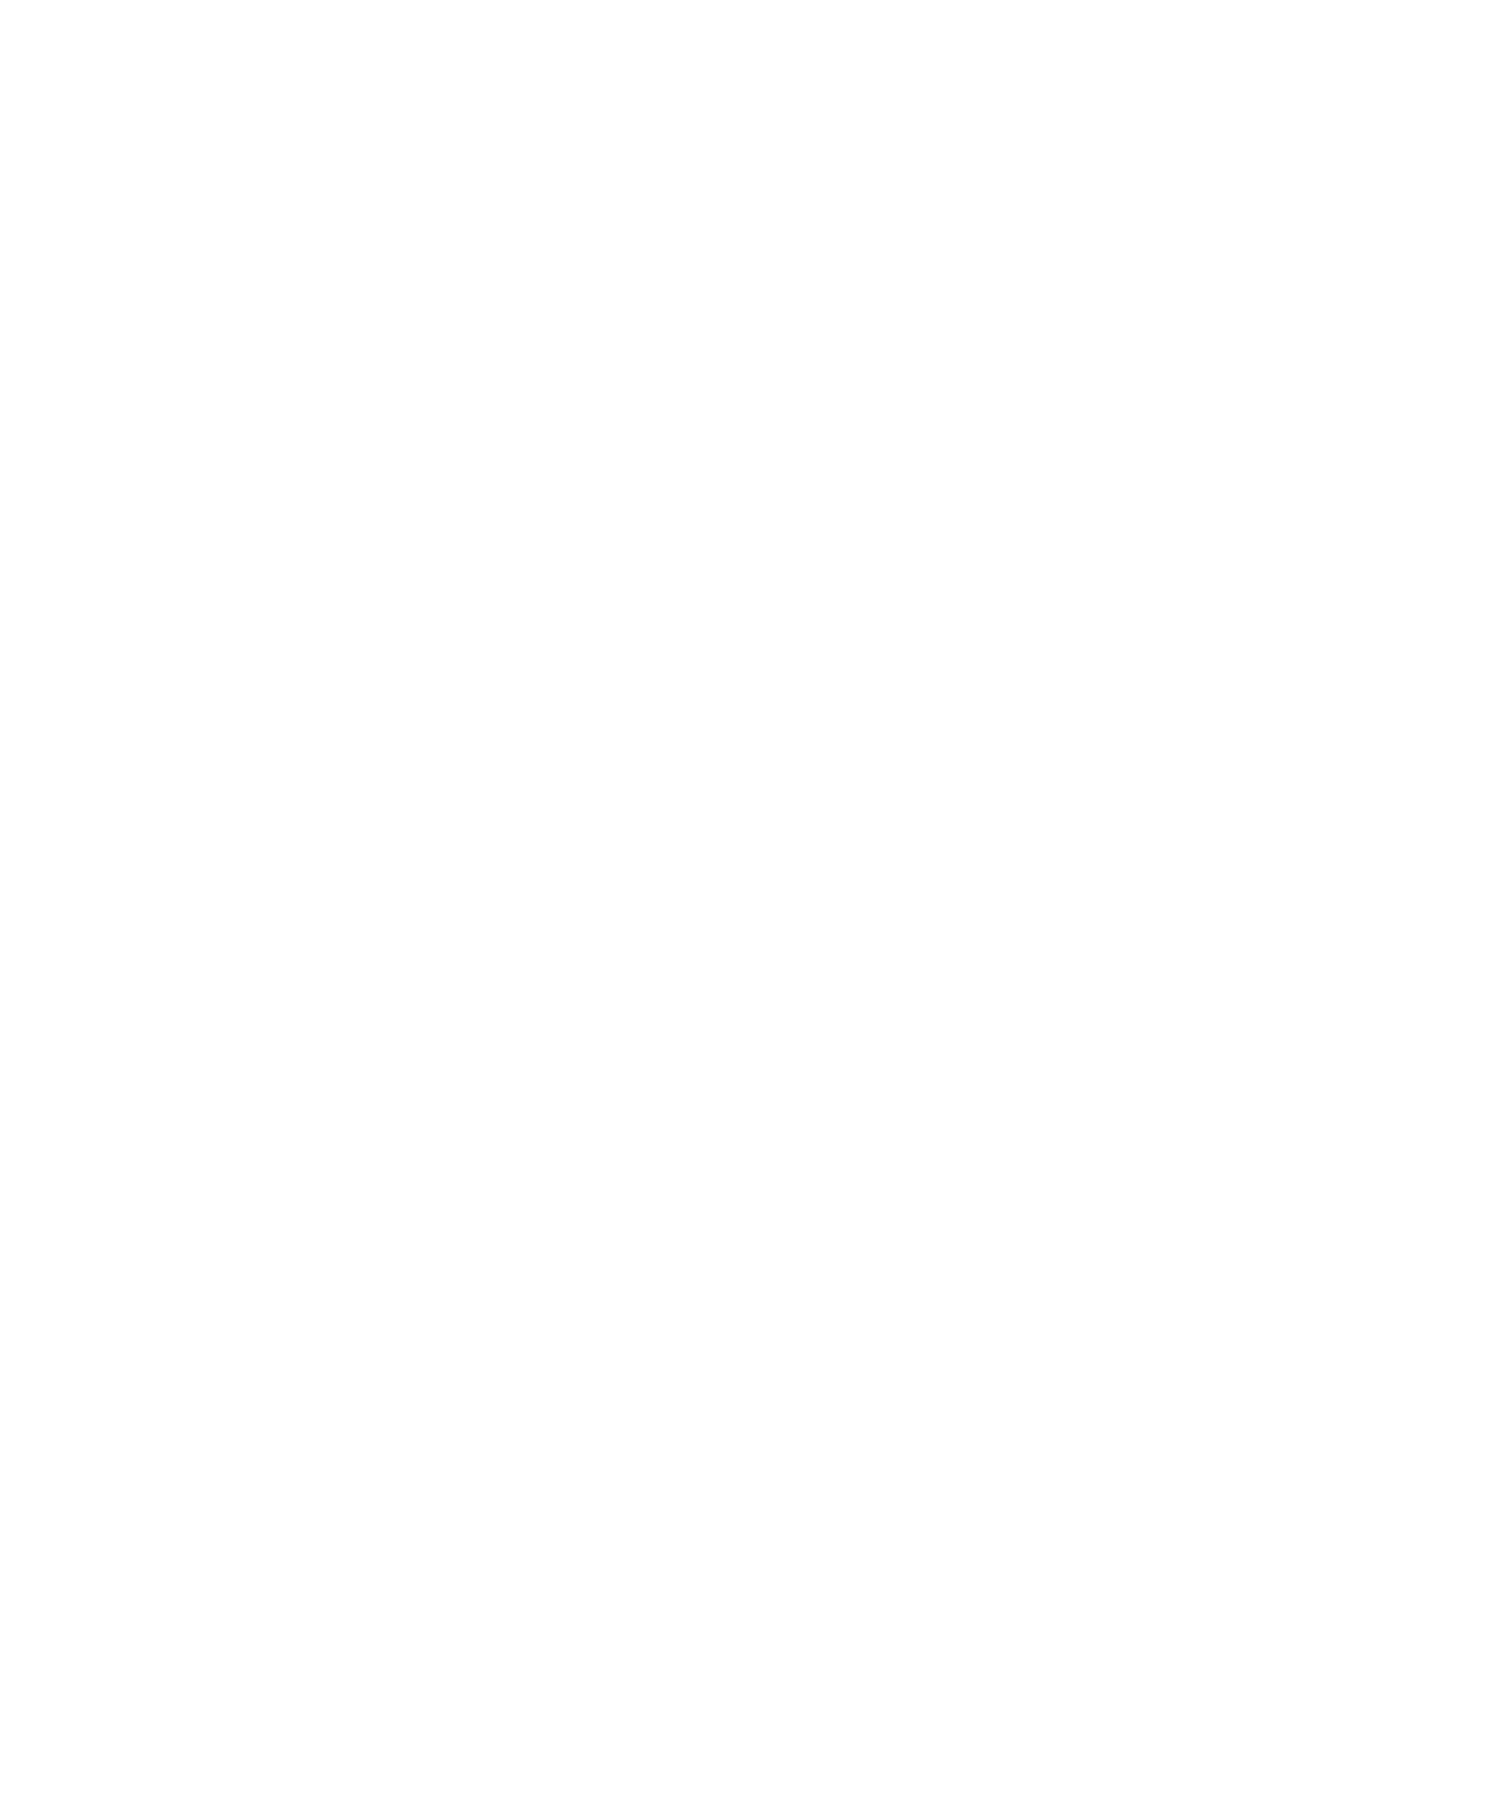 A White Silhouette Of A Person Lifting Weights